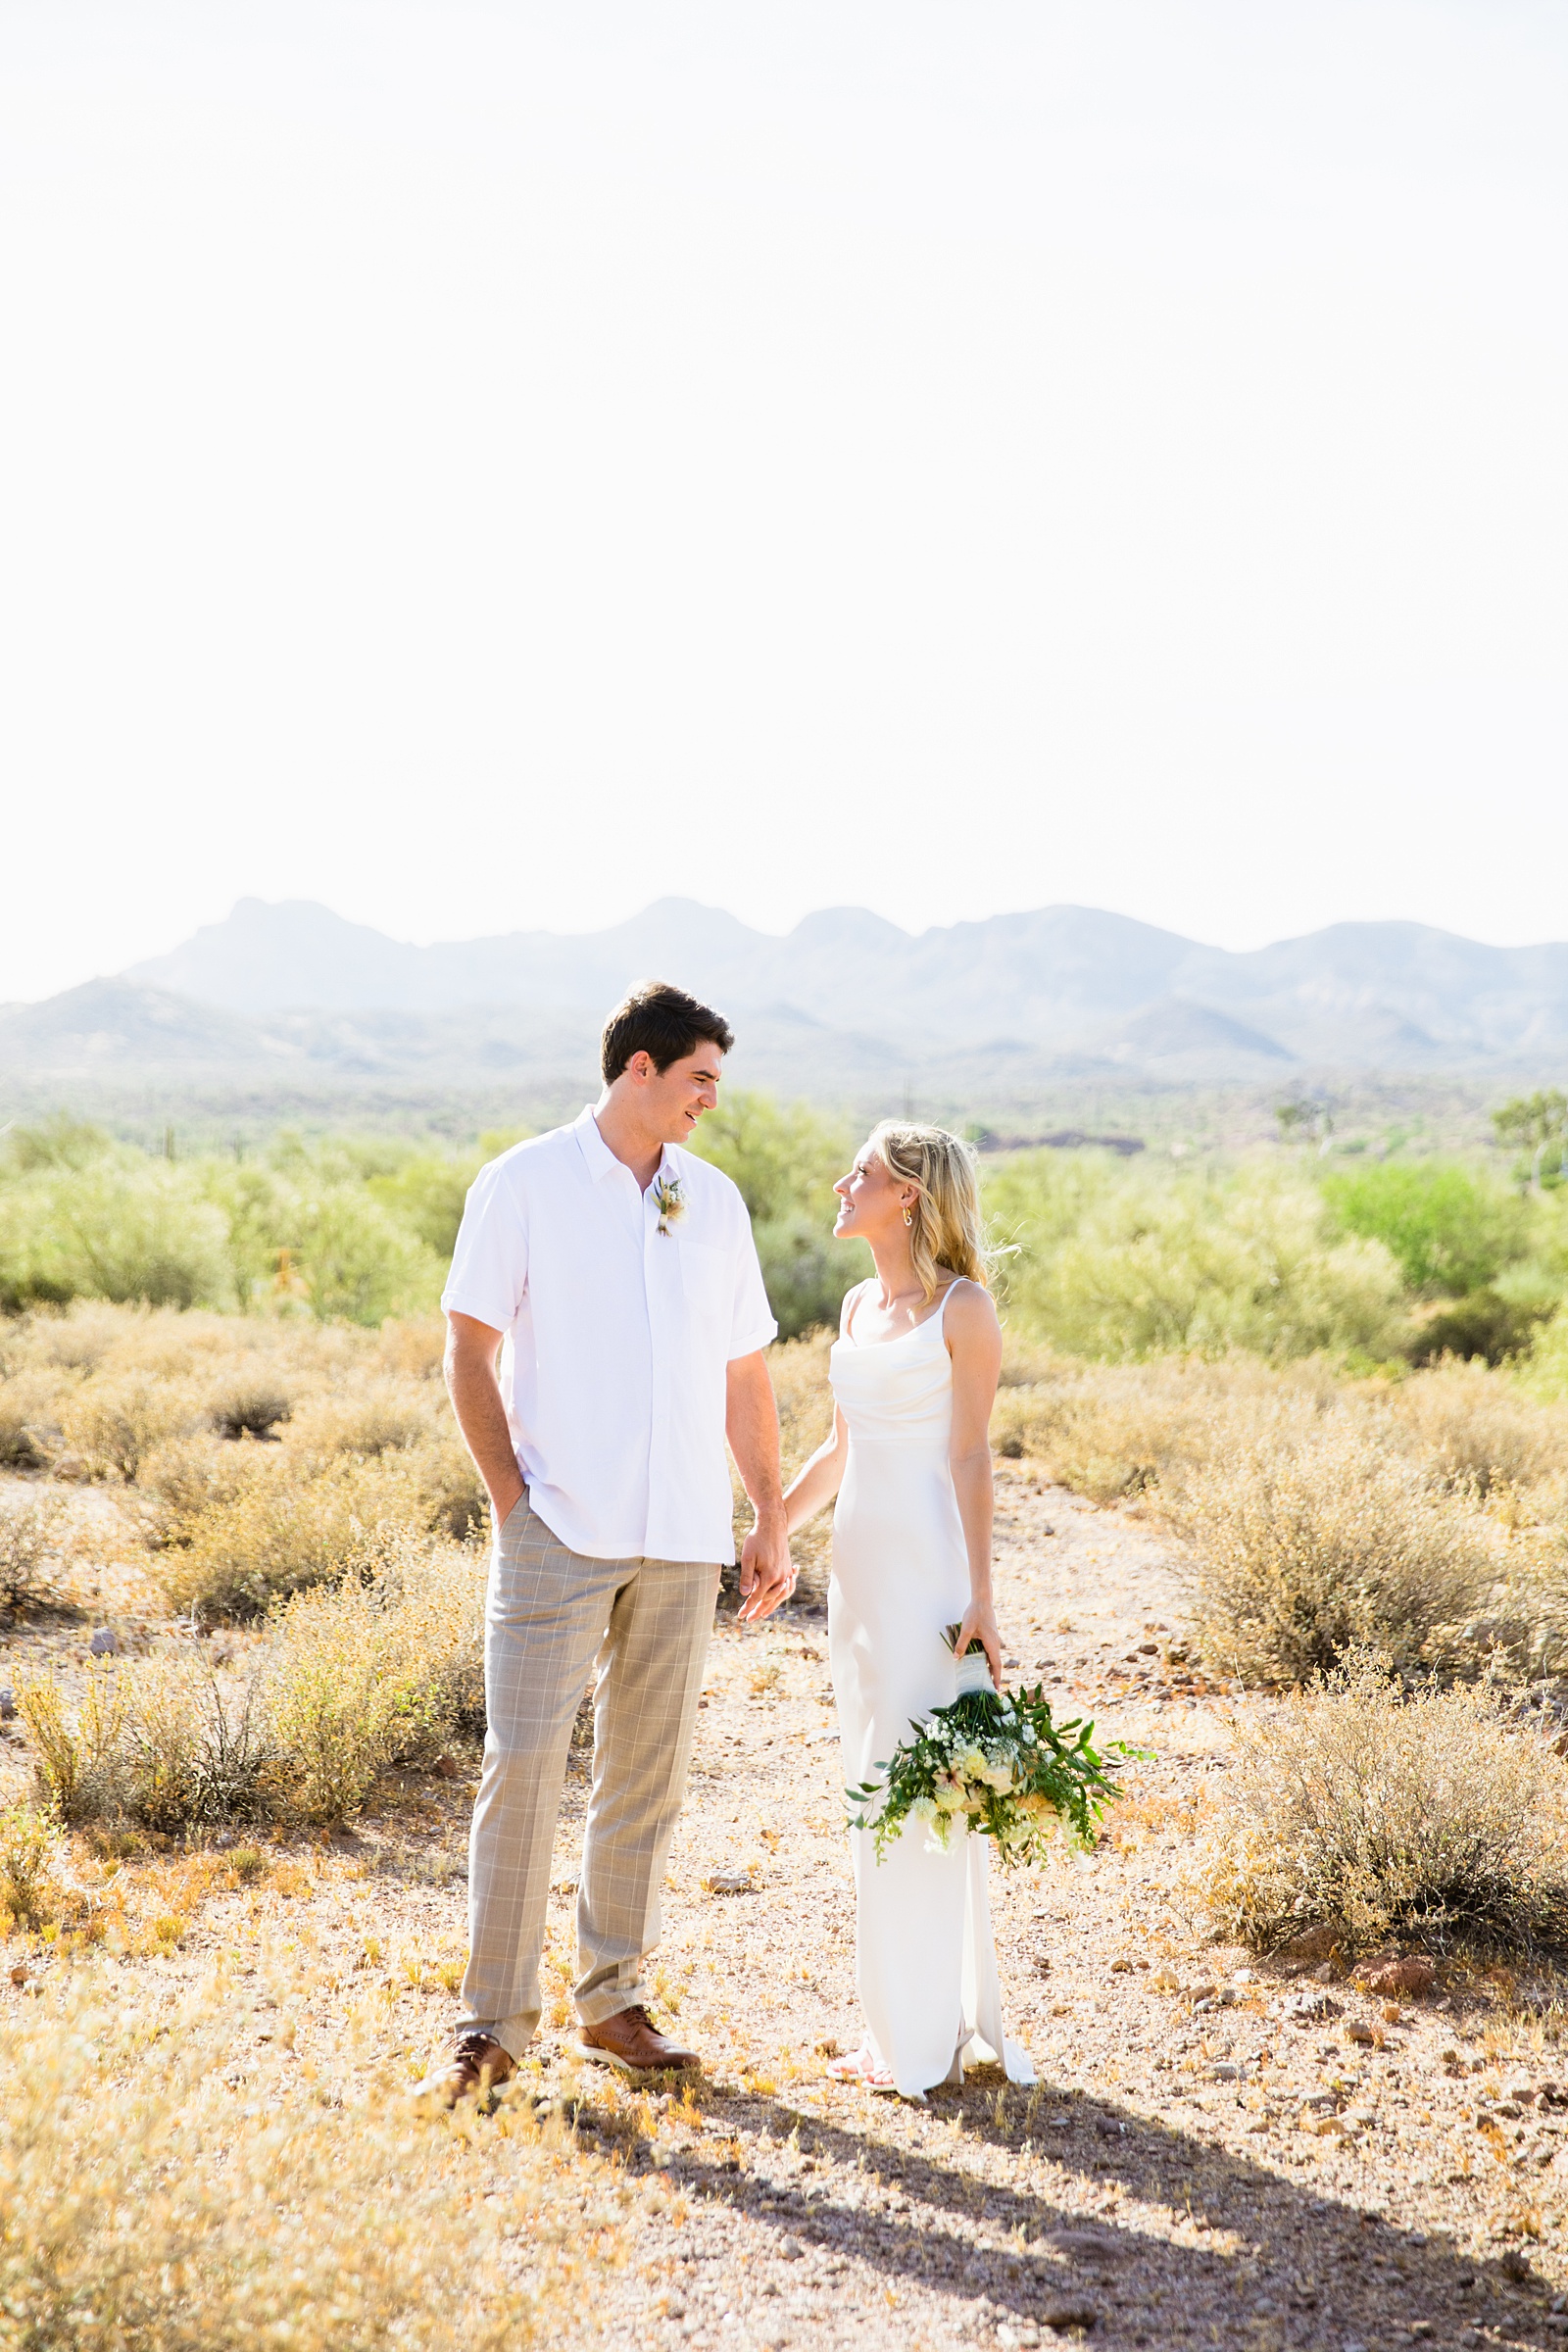 Bride and Groom pose for their Superstition Mountain Micro wedding by Lost Dutchman wedding photographer PMA Photography.